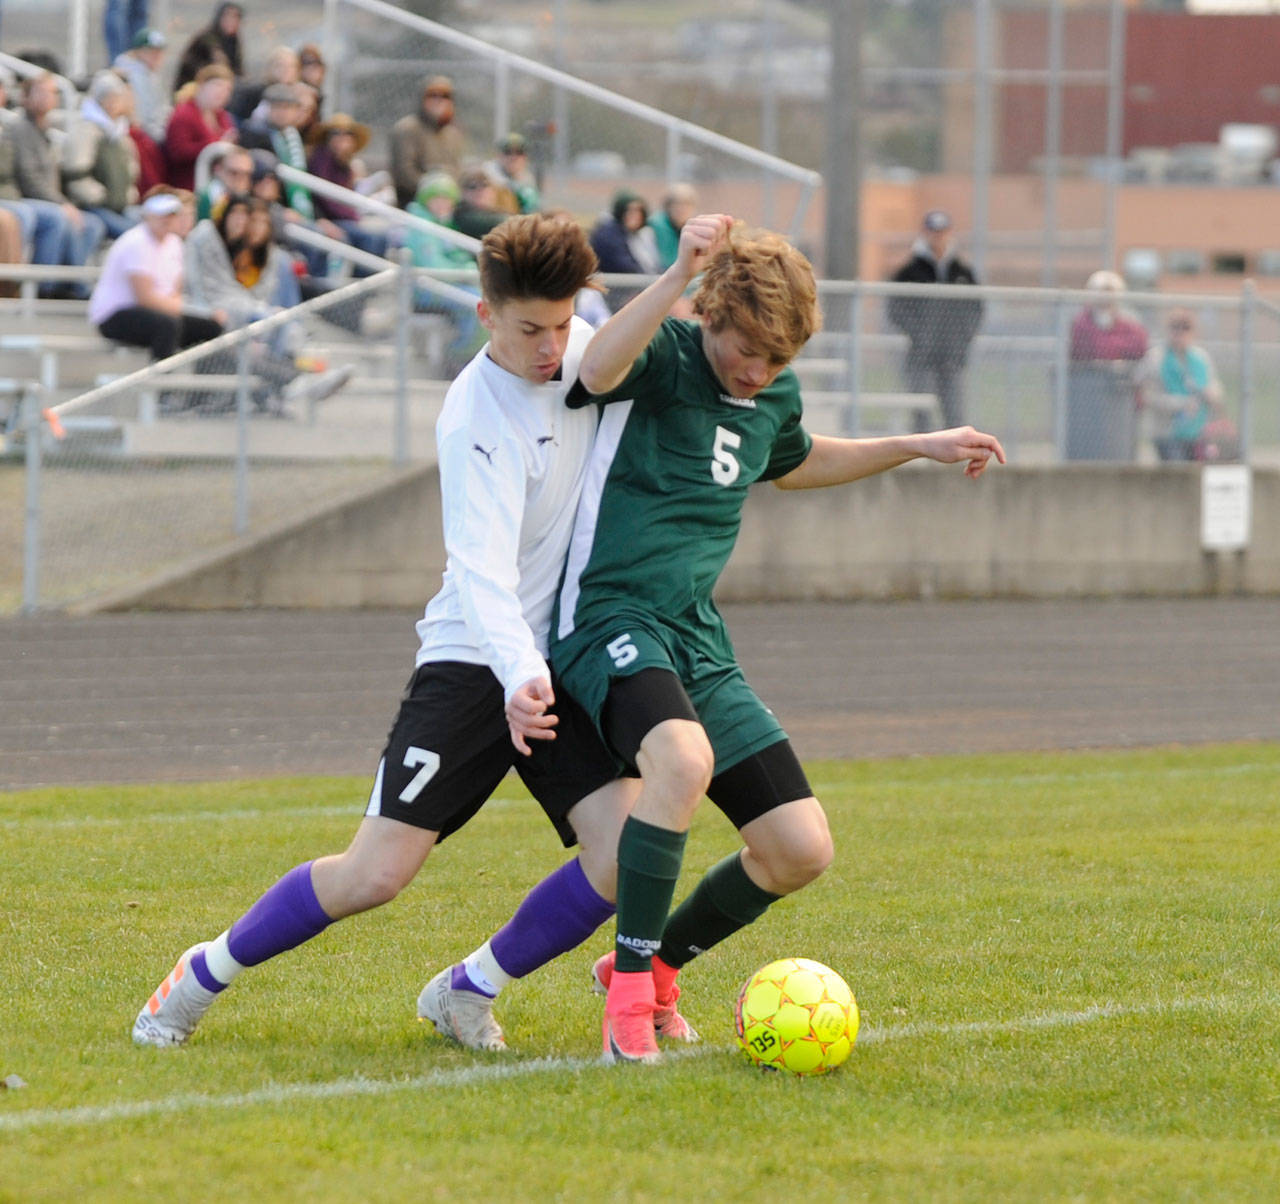 Boys soccer: Riders win rivalry match vs. Wolves